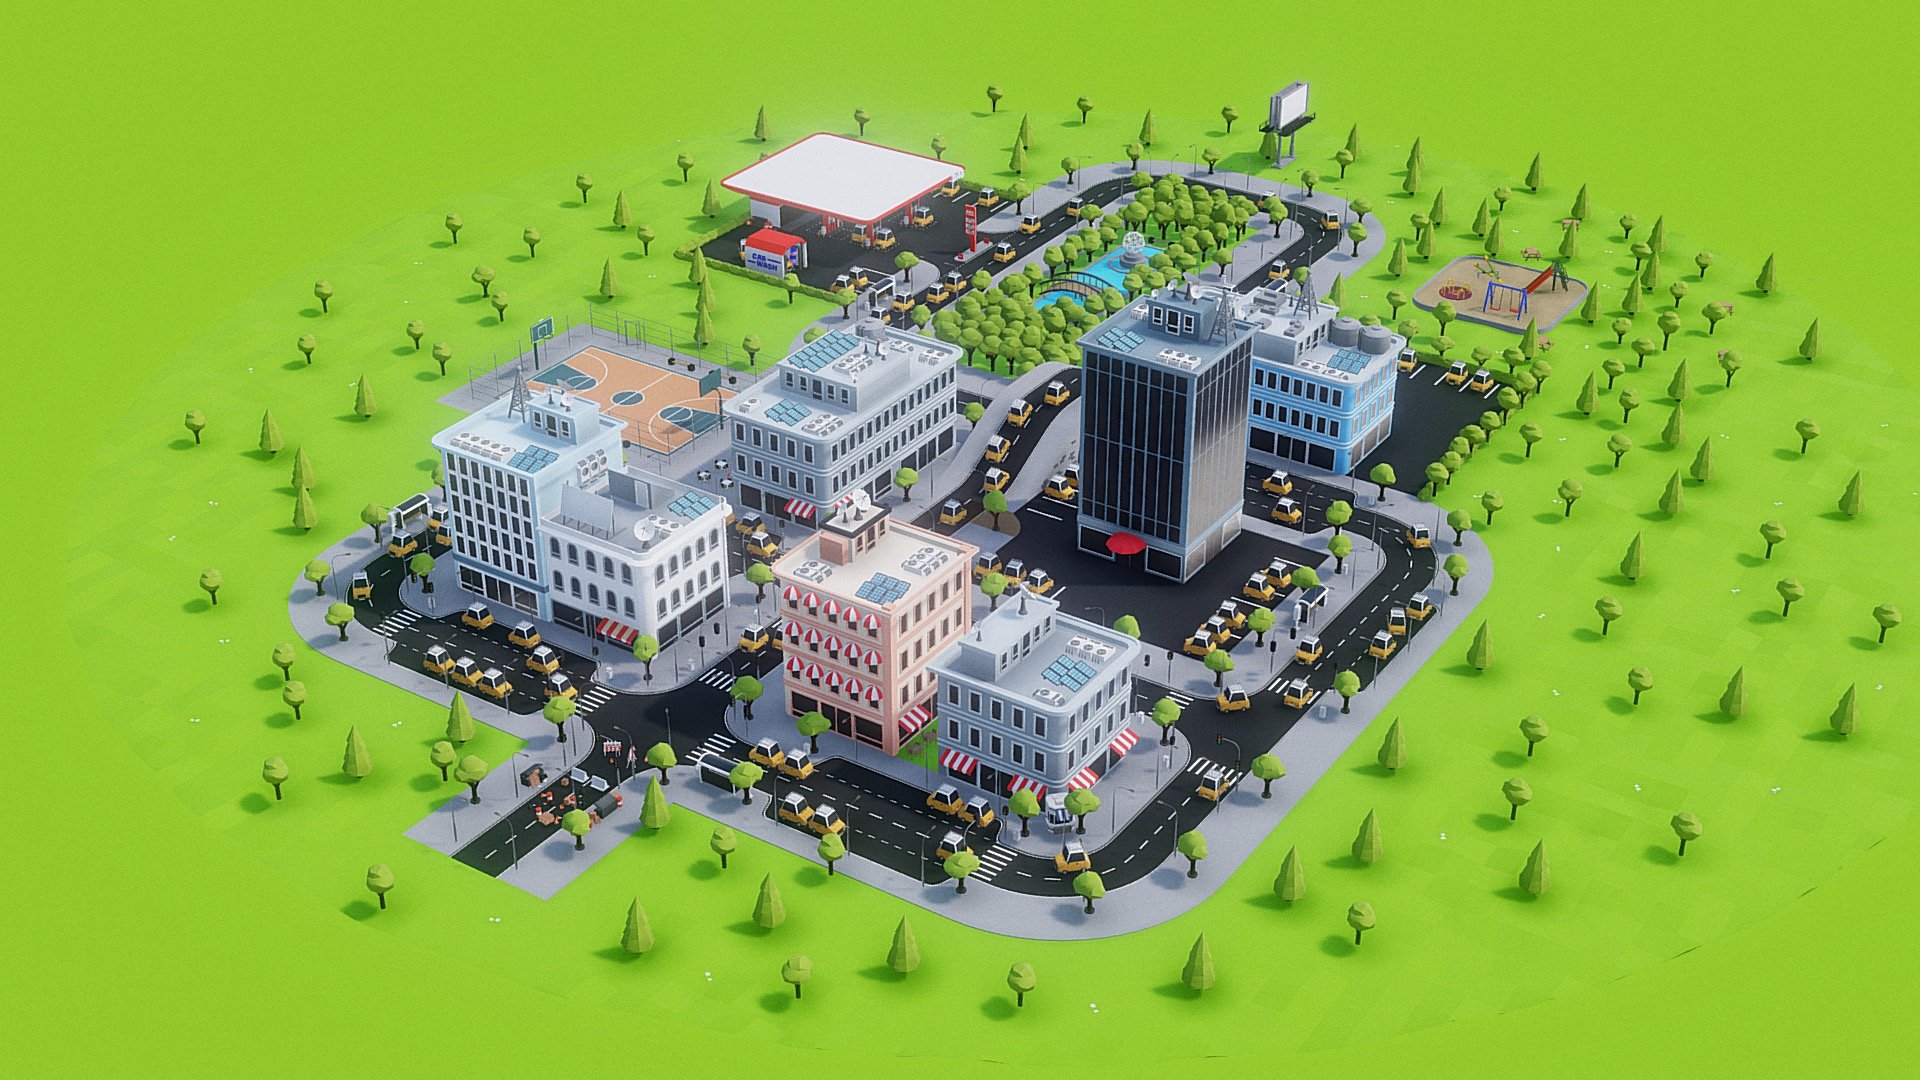 Check our other assets on

Asset Store and www.megapoly.art - BoxyCity - 3D model by Megapoly.Art 3d model